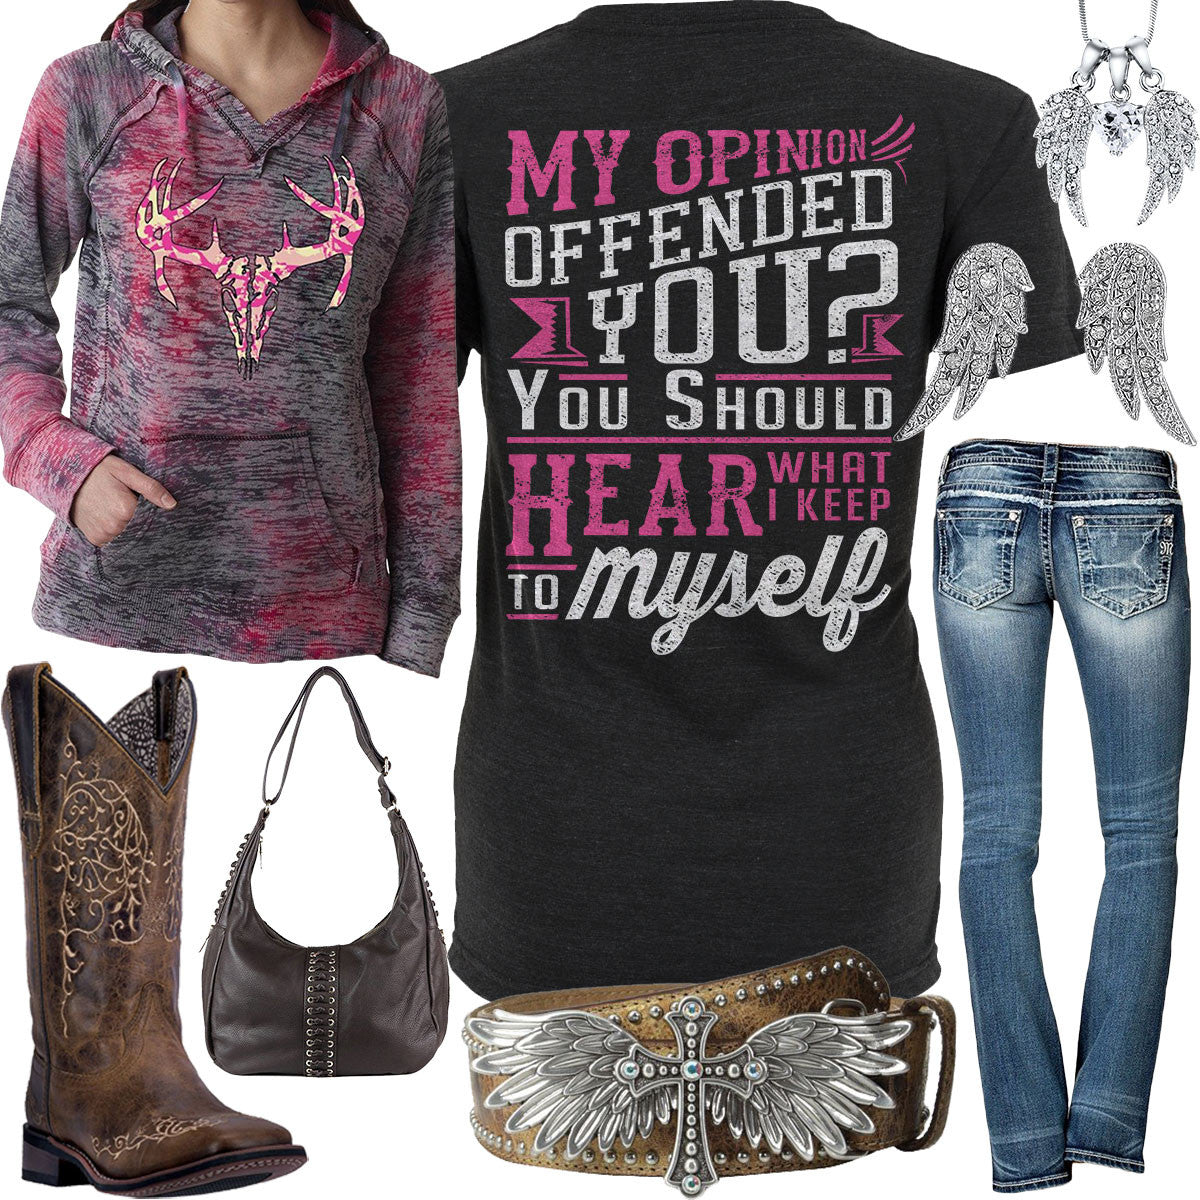 Keep To Myself Justin Angel Wing Cross Belt Outfit – Real Country Ladies